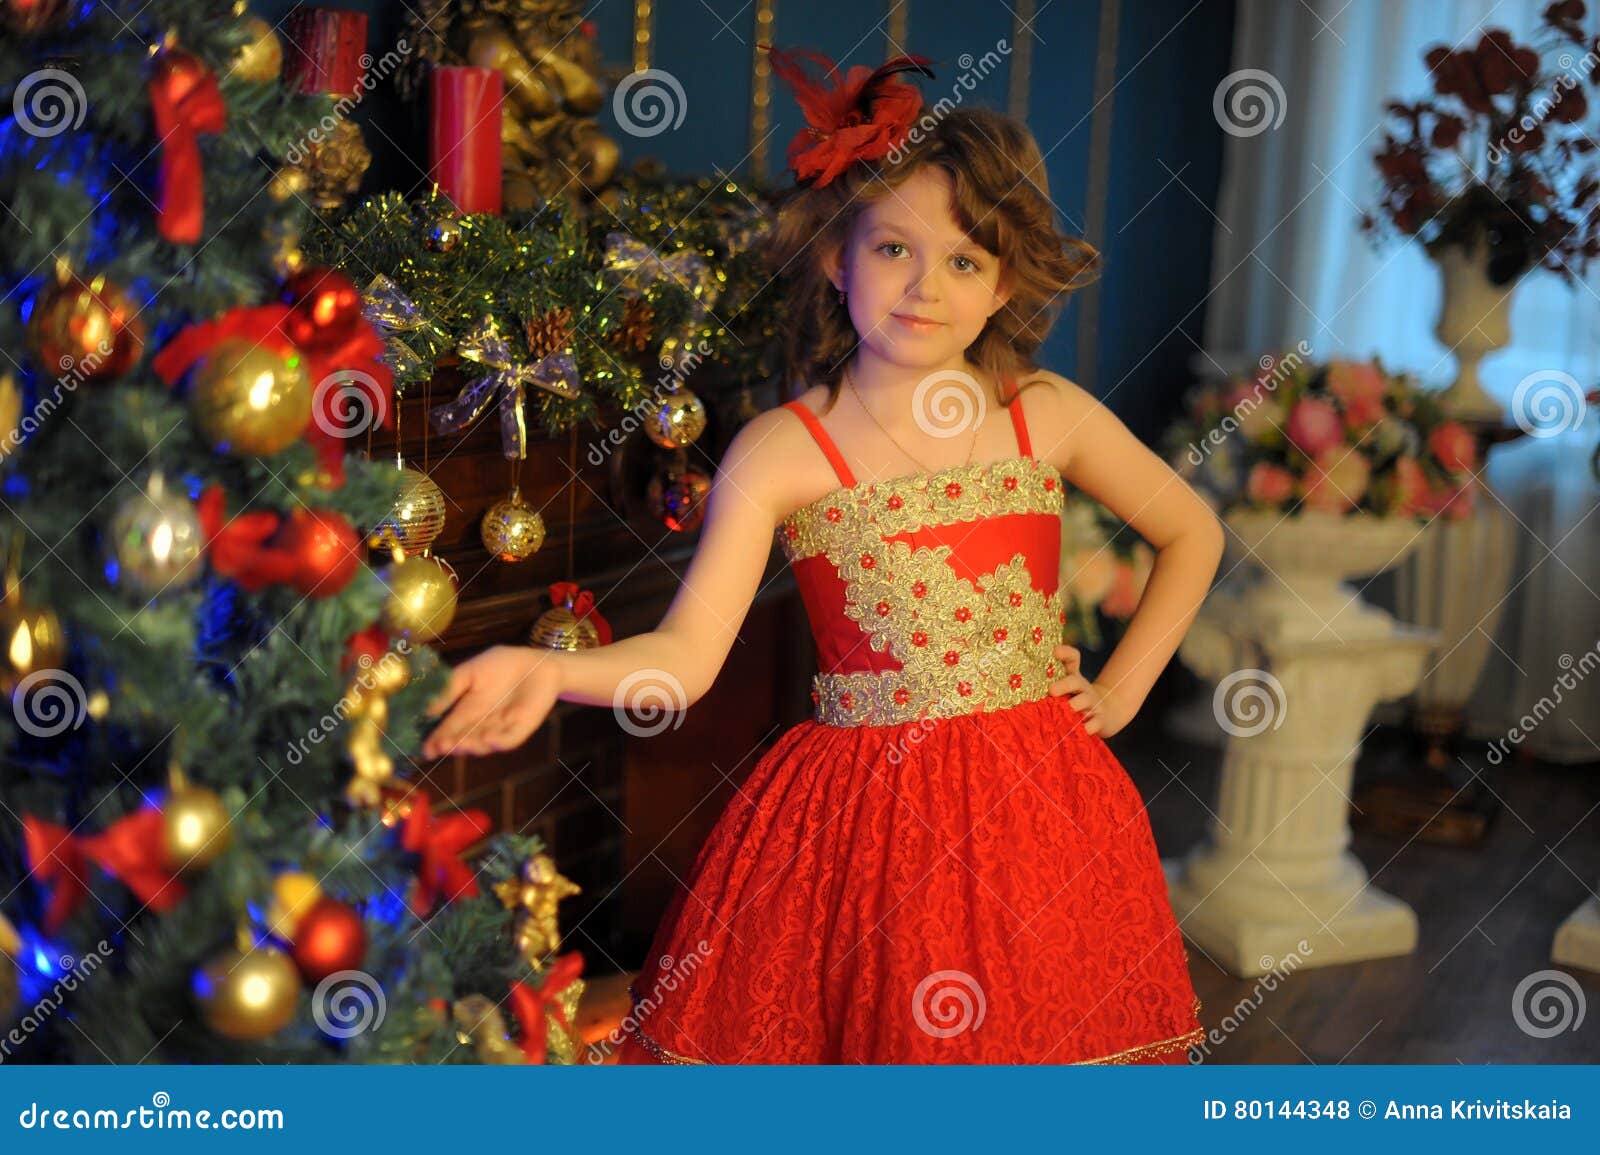 Young Beautiful Girl in a Red Dress Stock Photo - Image of background ...